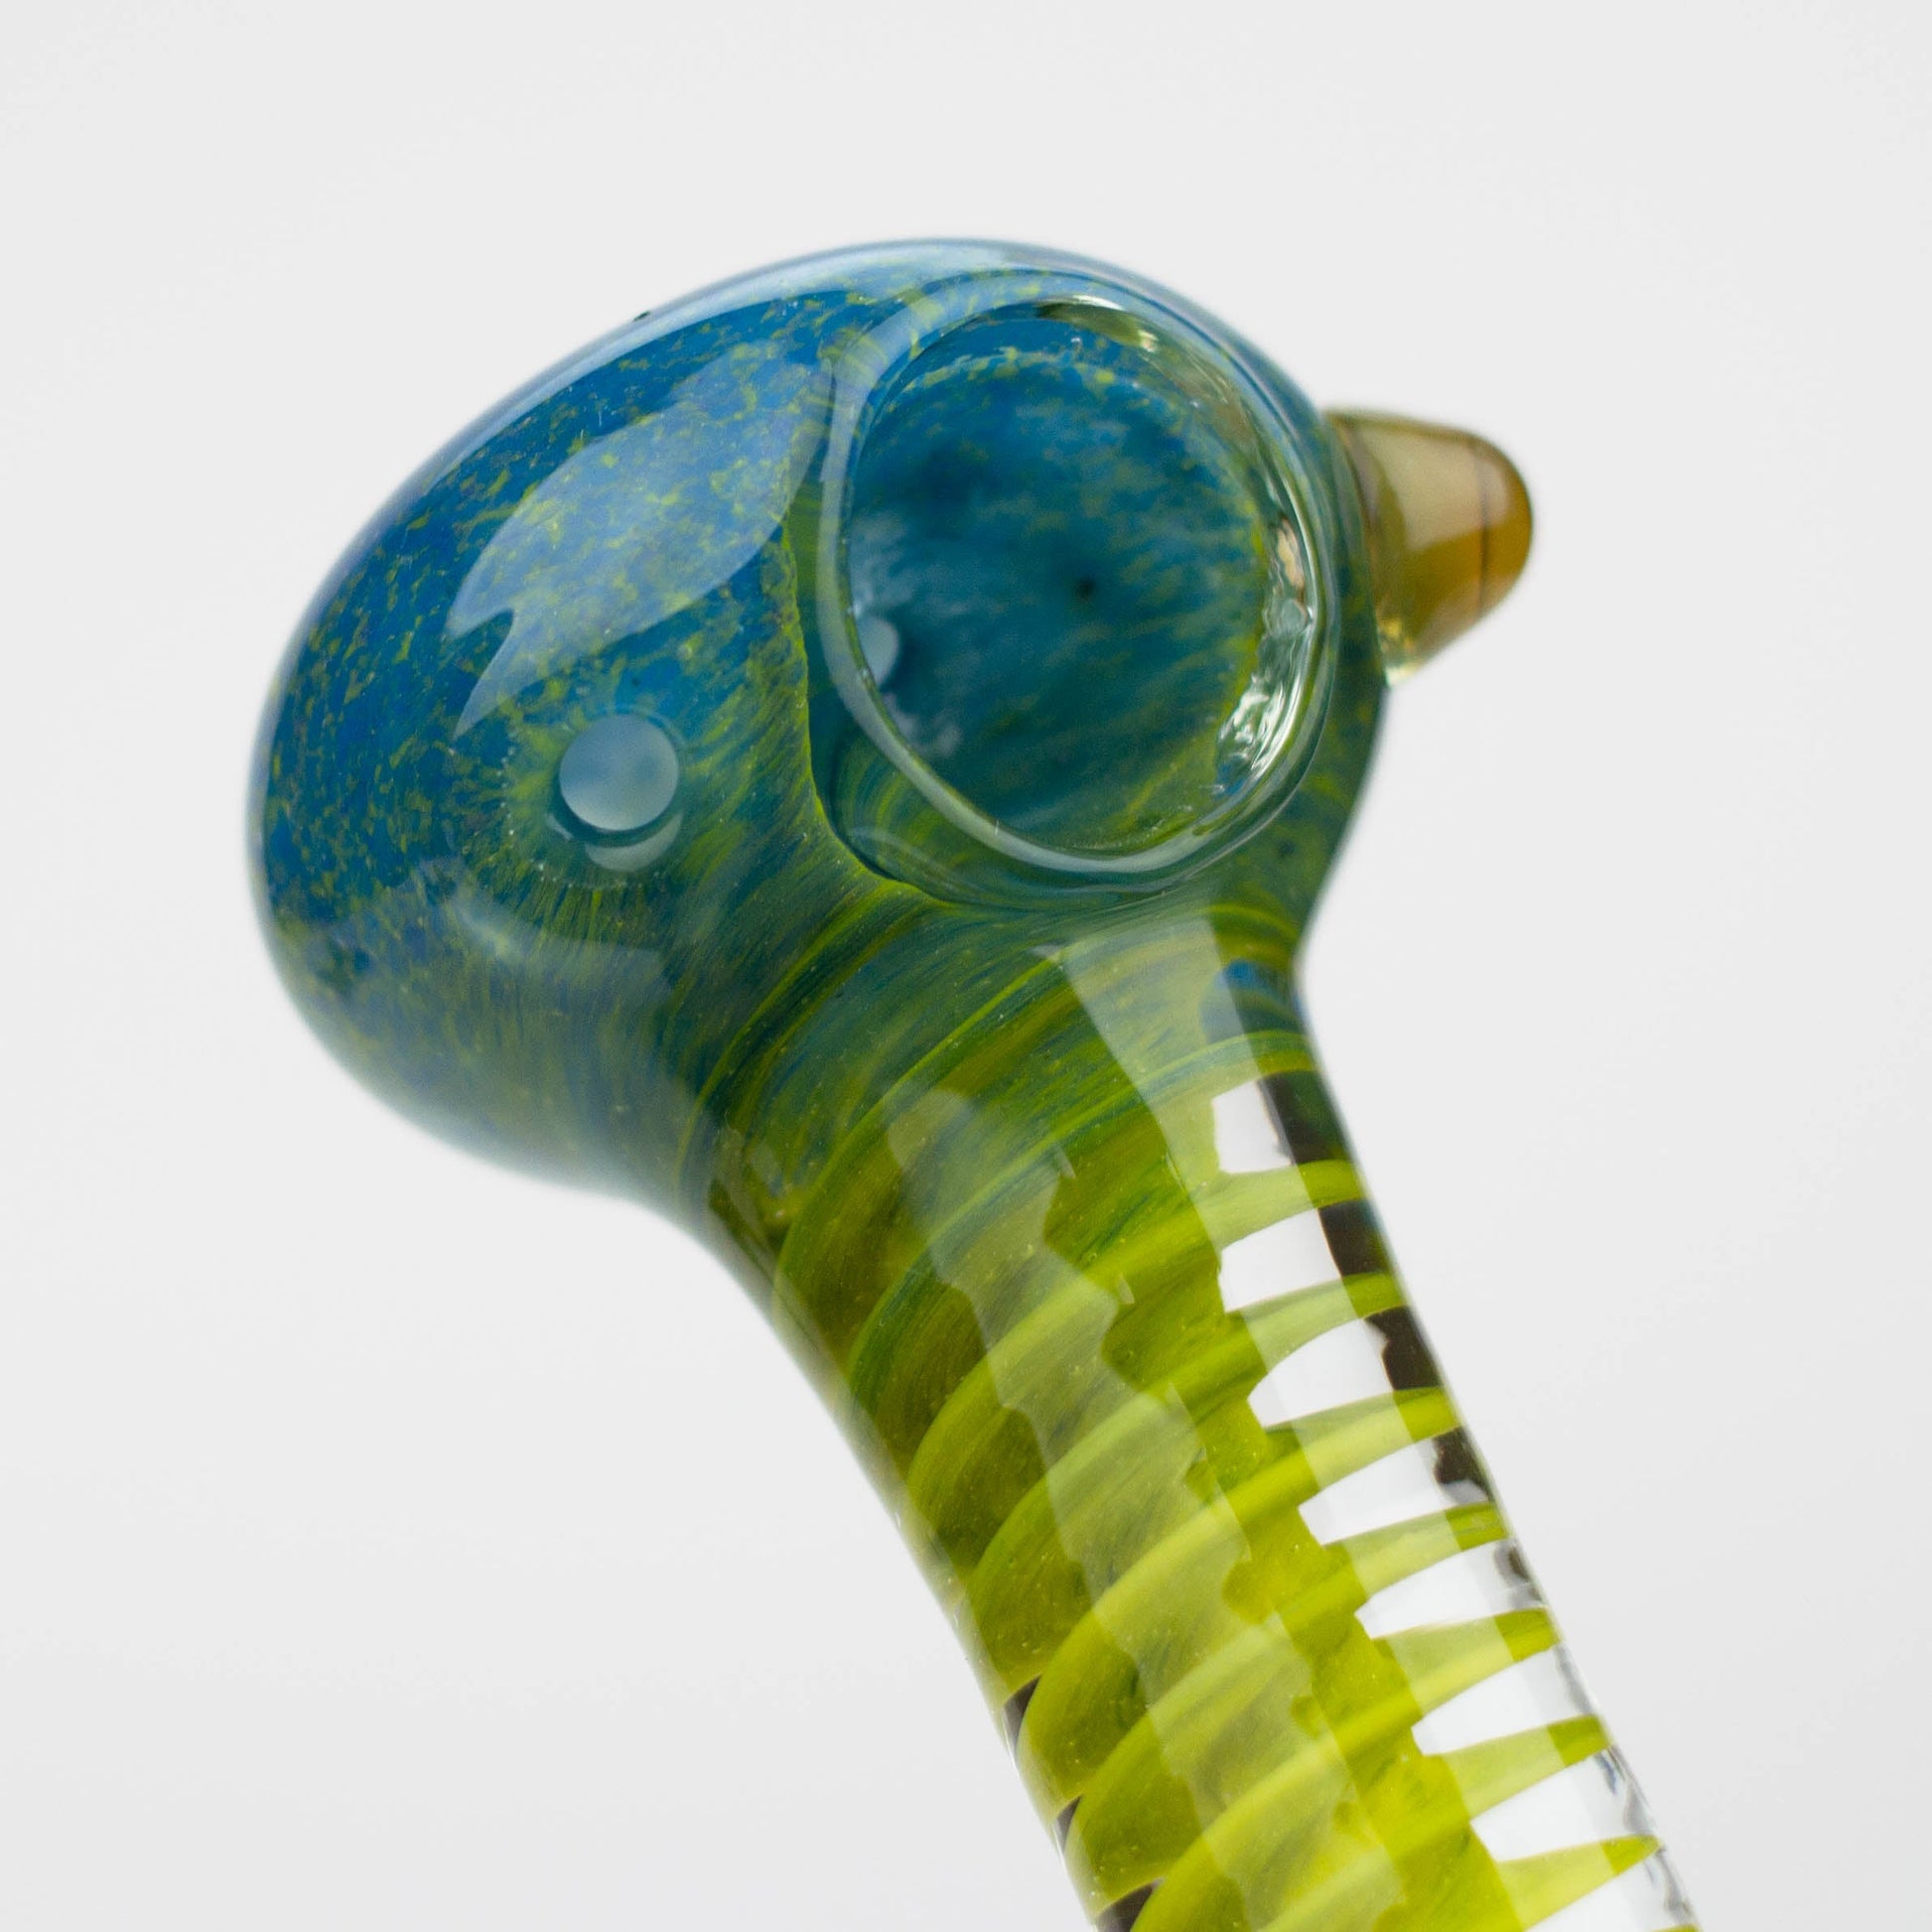 4.5" soft glass hand pipe [AP5085]_1